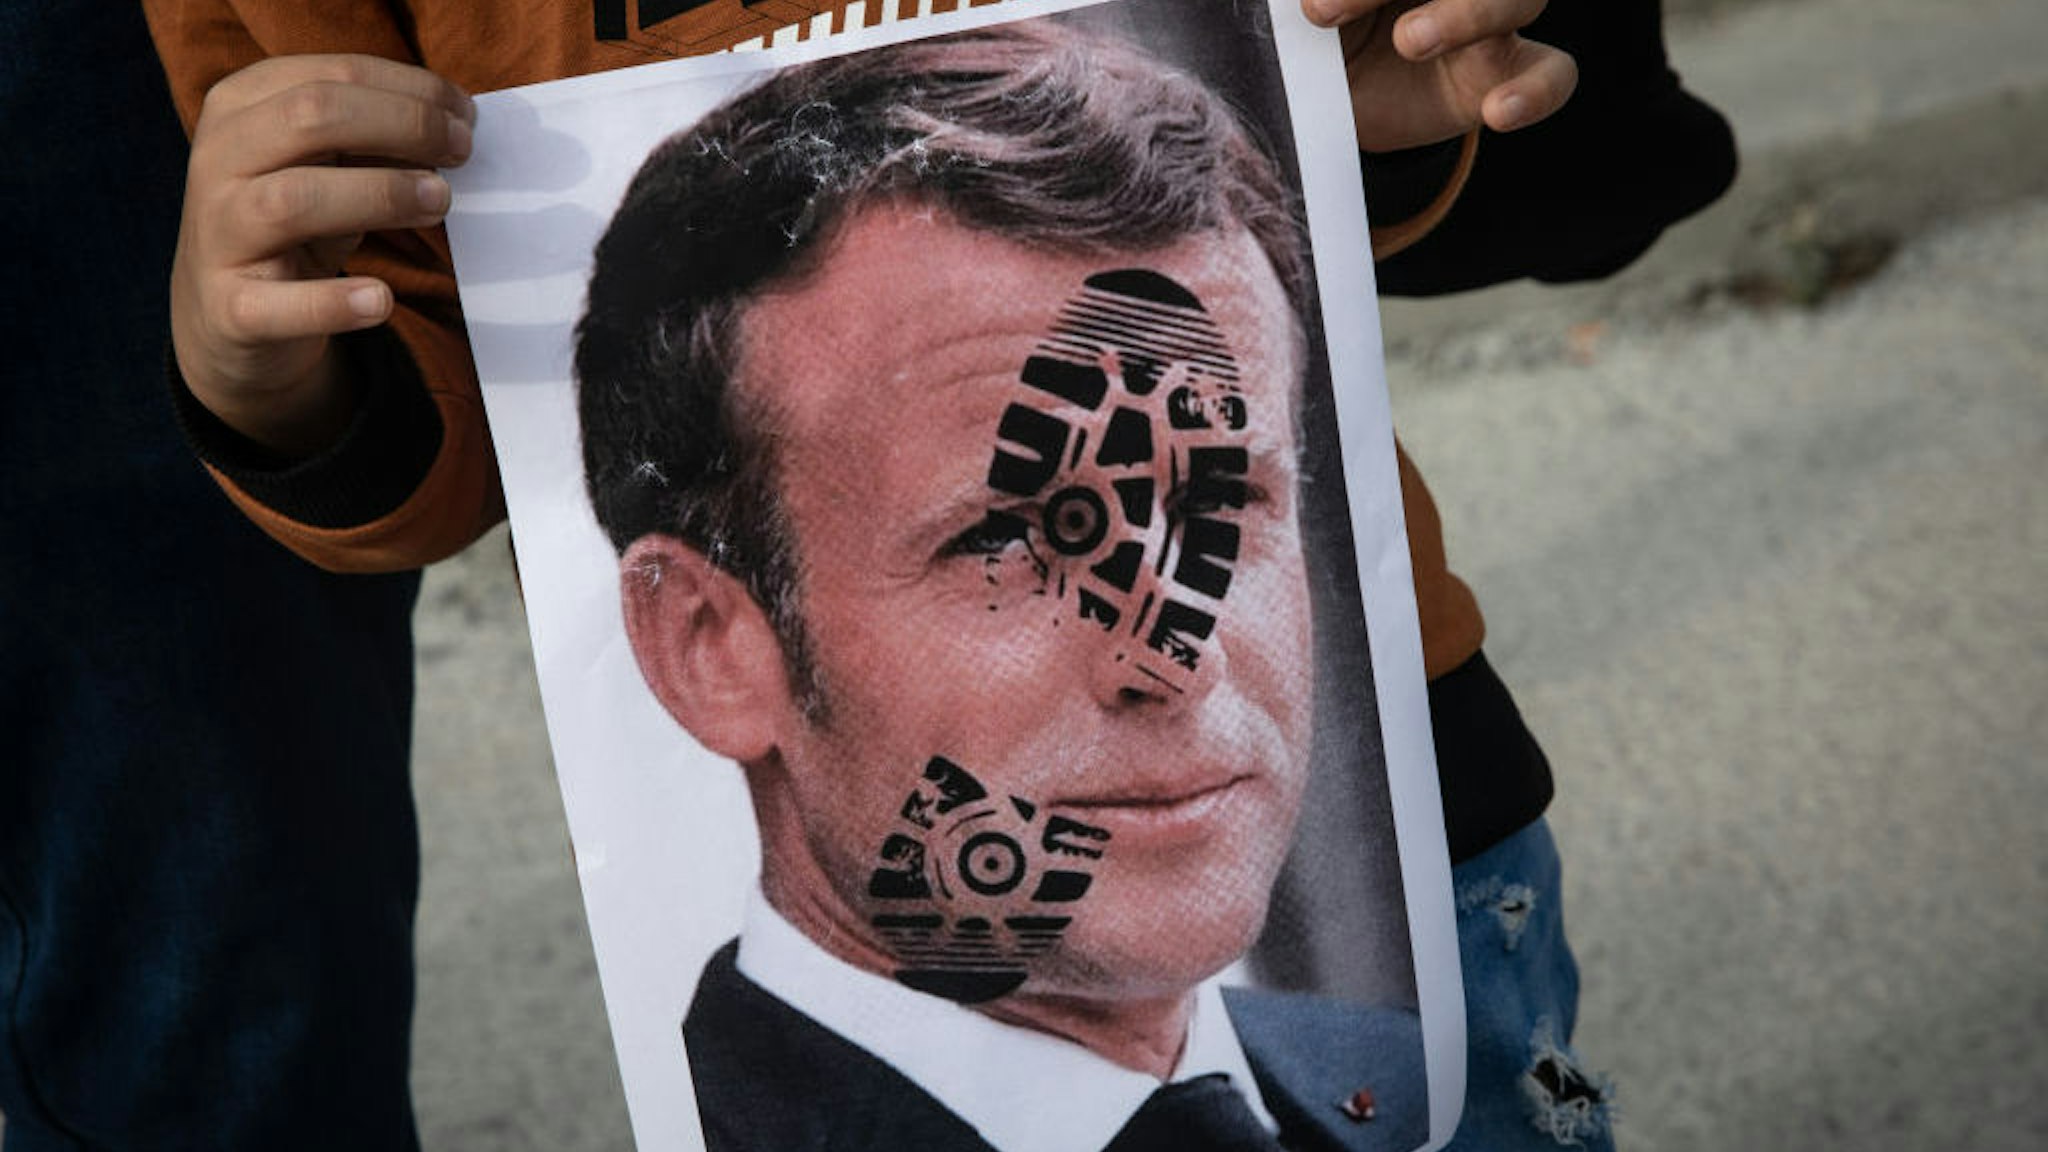 ISTANBUL, TURKEY - OCTOBER 25: A boy holds a poster showing the portrait of French President Emmanuel Macron during a protest against French president Emmanuel Macron on October 25, 2020 in Istanbul, Turkey. People gathered to protest against the recent statements by French President Emmanuel Macron regarding the beheading of a teacher that displayed cartoons of Prophet Muhammad in his class and the closure of some mosques in France. (Photo by Chris McGrath/Getty Images)